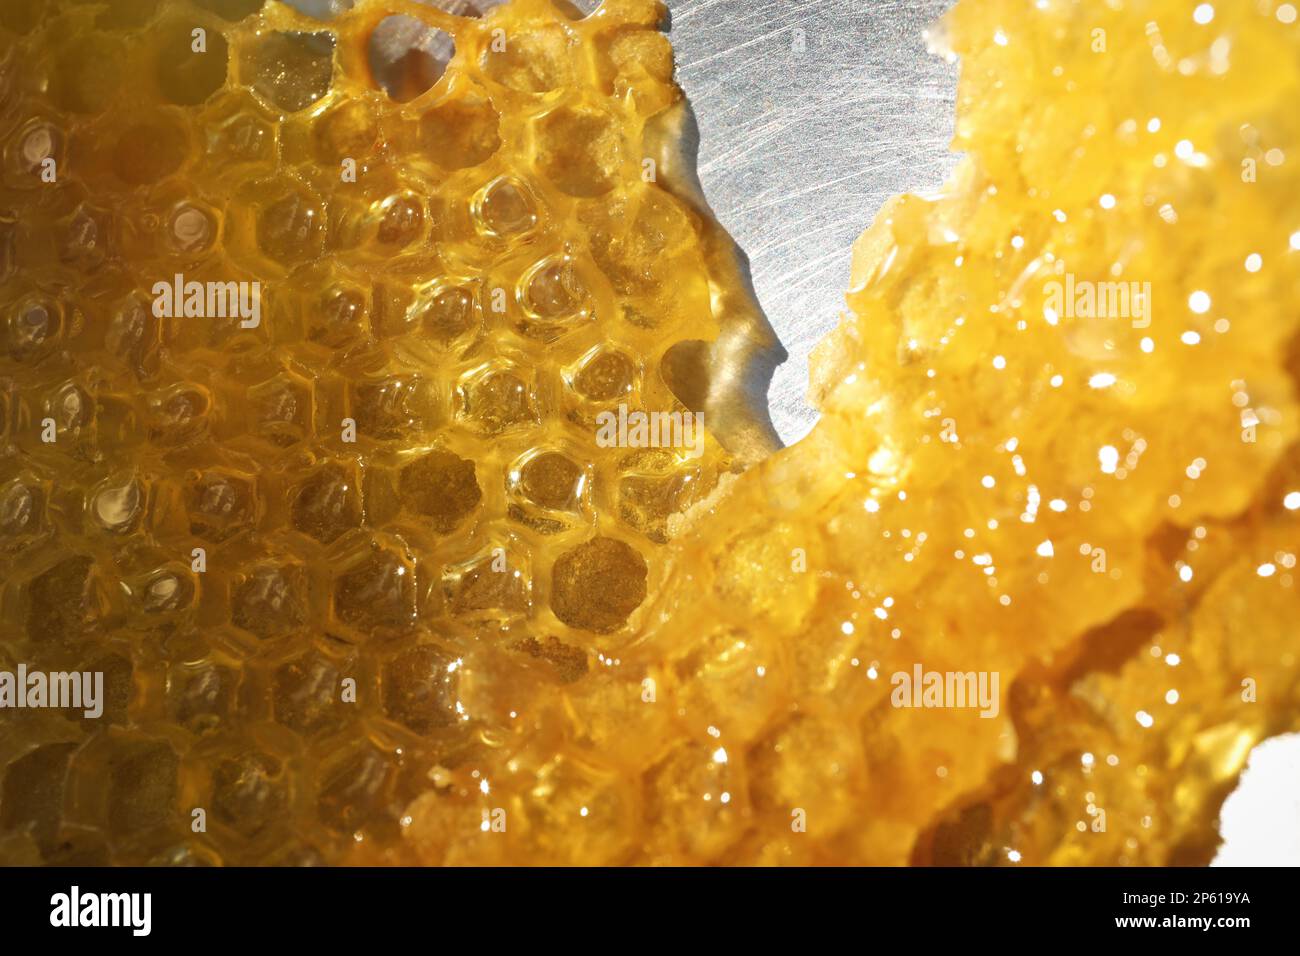 Uncapping honey cells with knife, closeup view Stock Photo